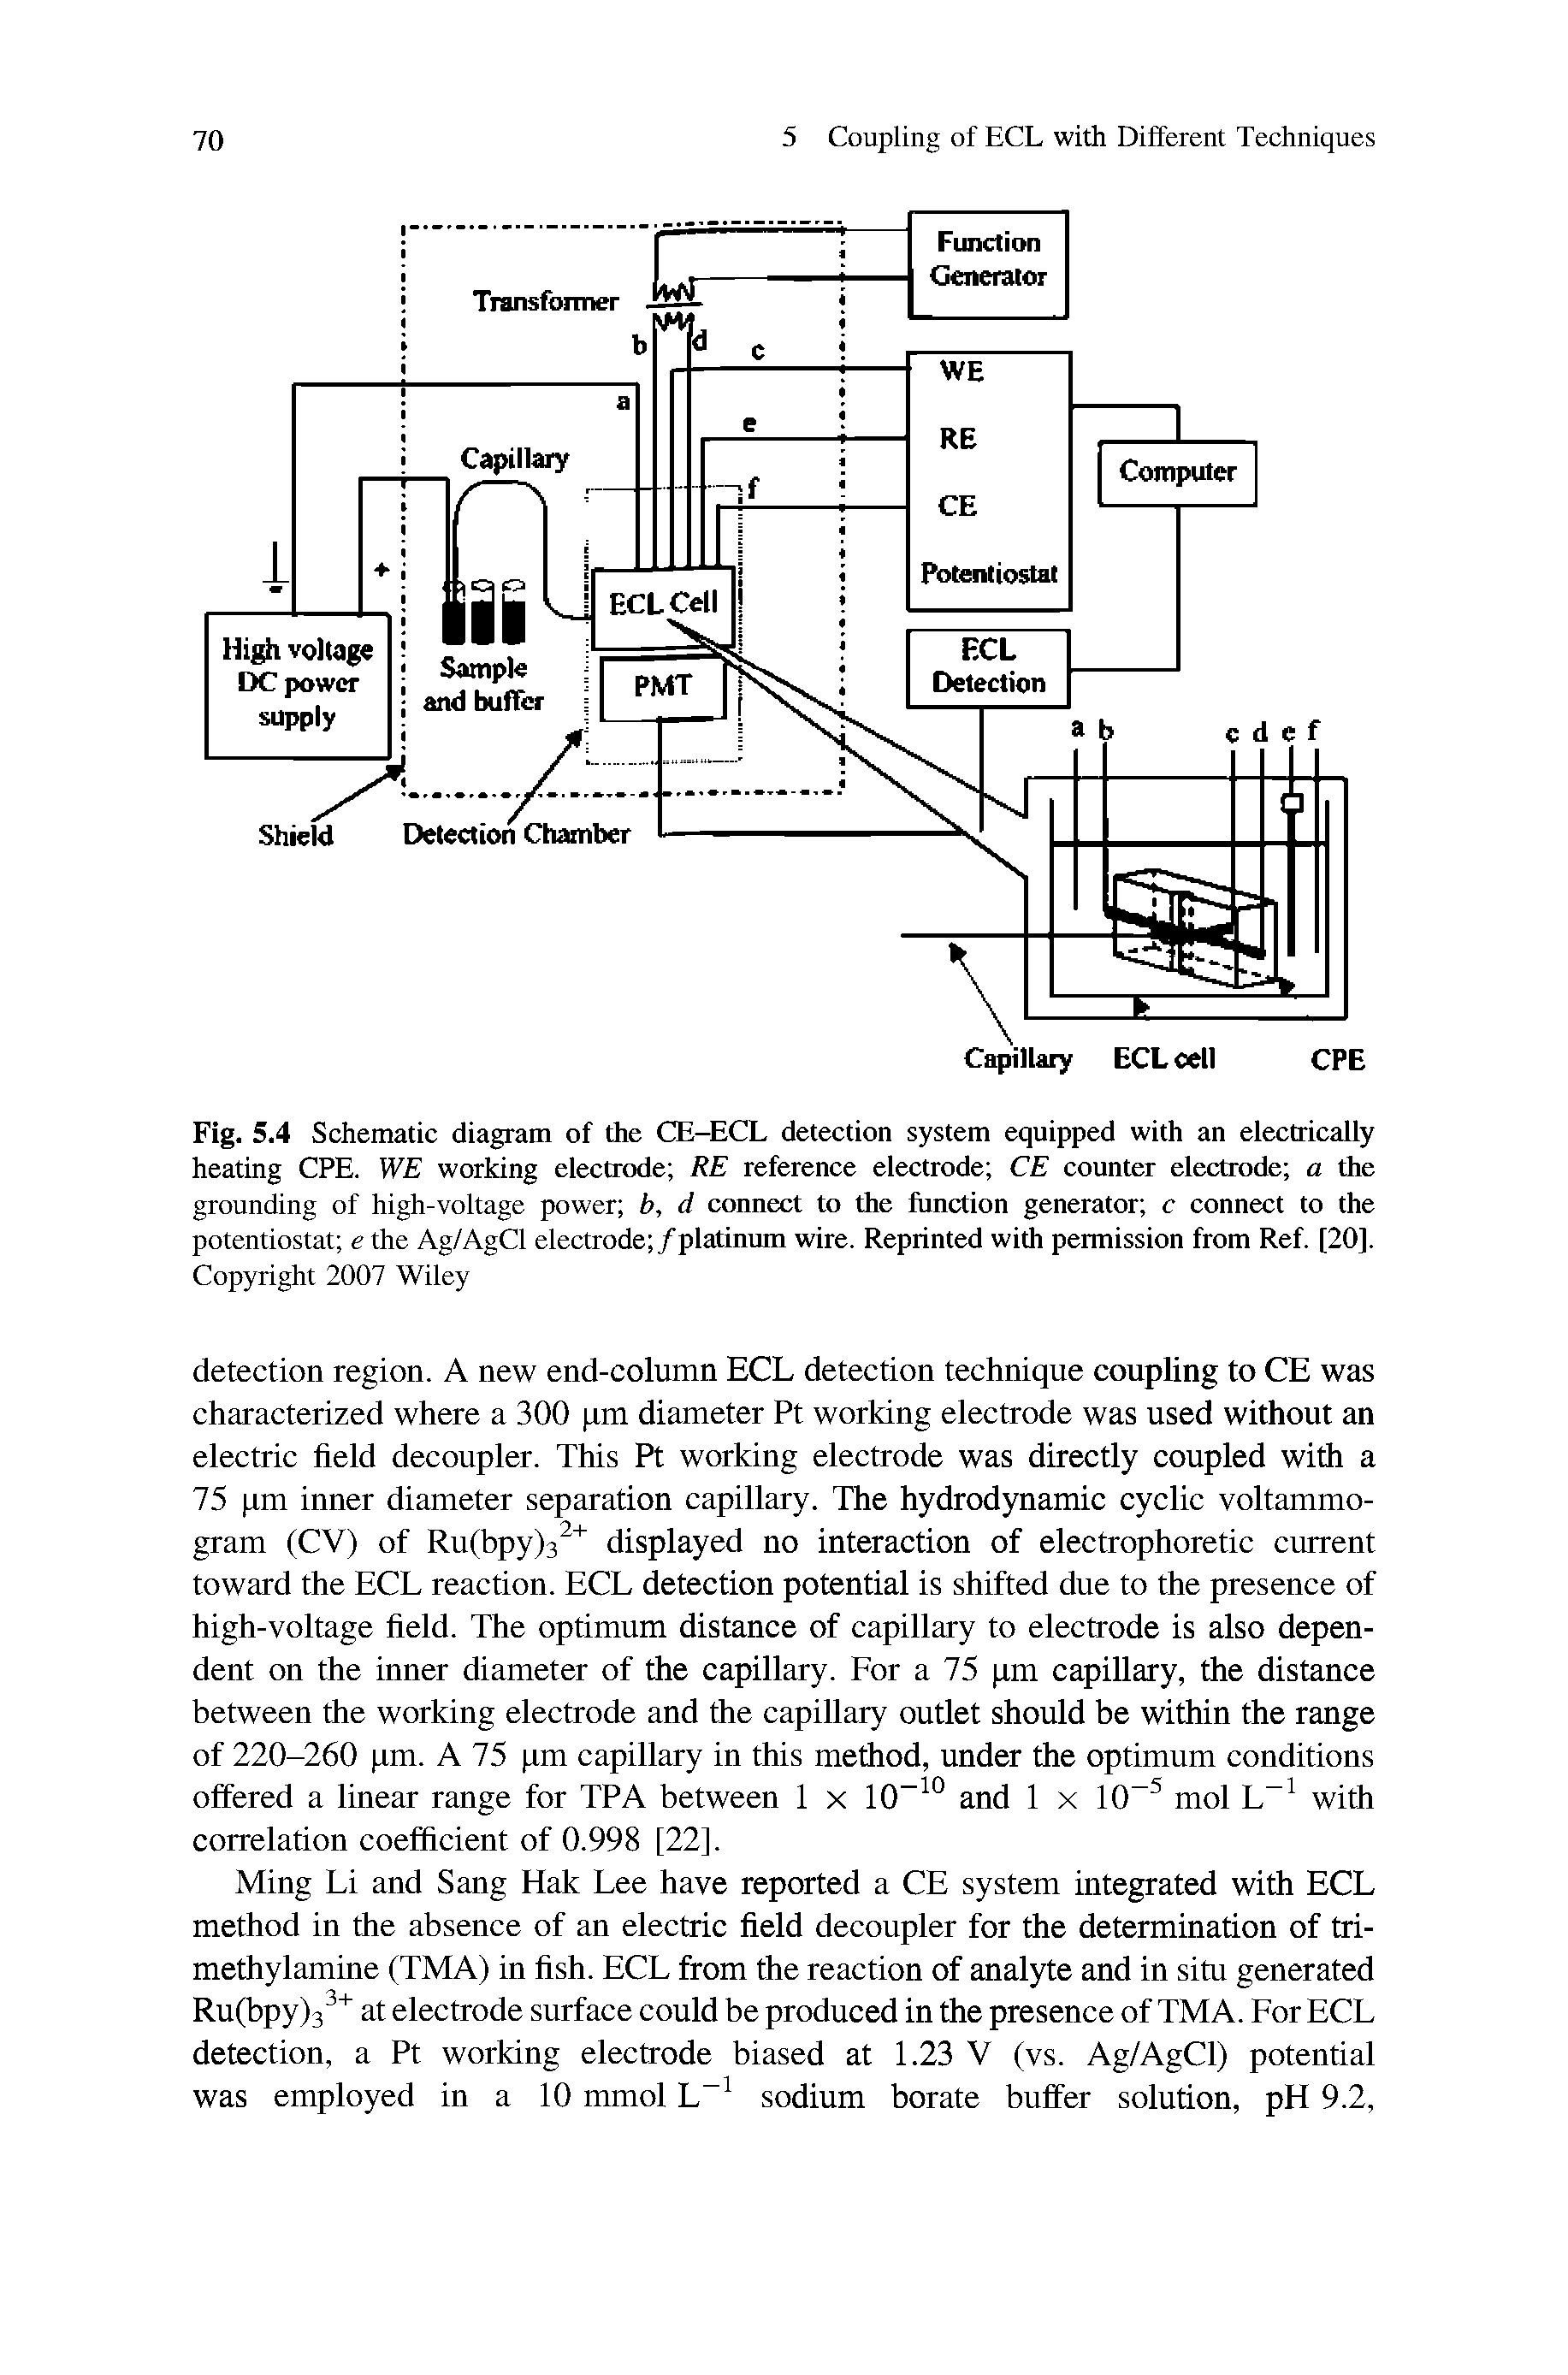 Fig. 5.4 Schematic diagram of the CE-ECL detection system equipped with an electrically heating CPE. WE working electrode RE reference electrode CE counter electrode a the grounding of high-voltage power b, d connect to the function generator c connect to the potentiostat e the Ag/AgCl electrode /platinum wire. Reprinted with permission from Ref. [20].